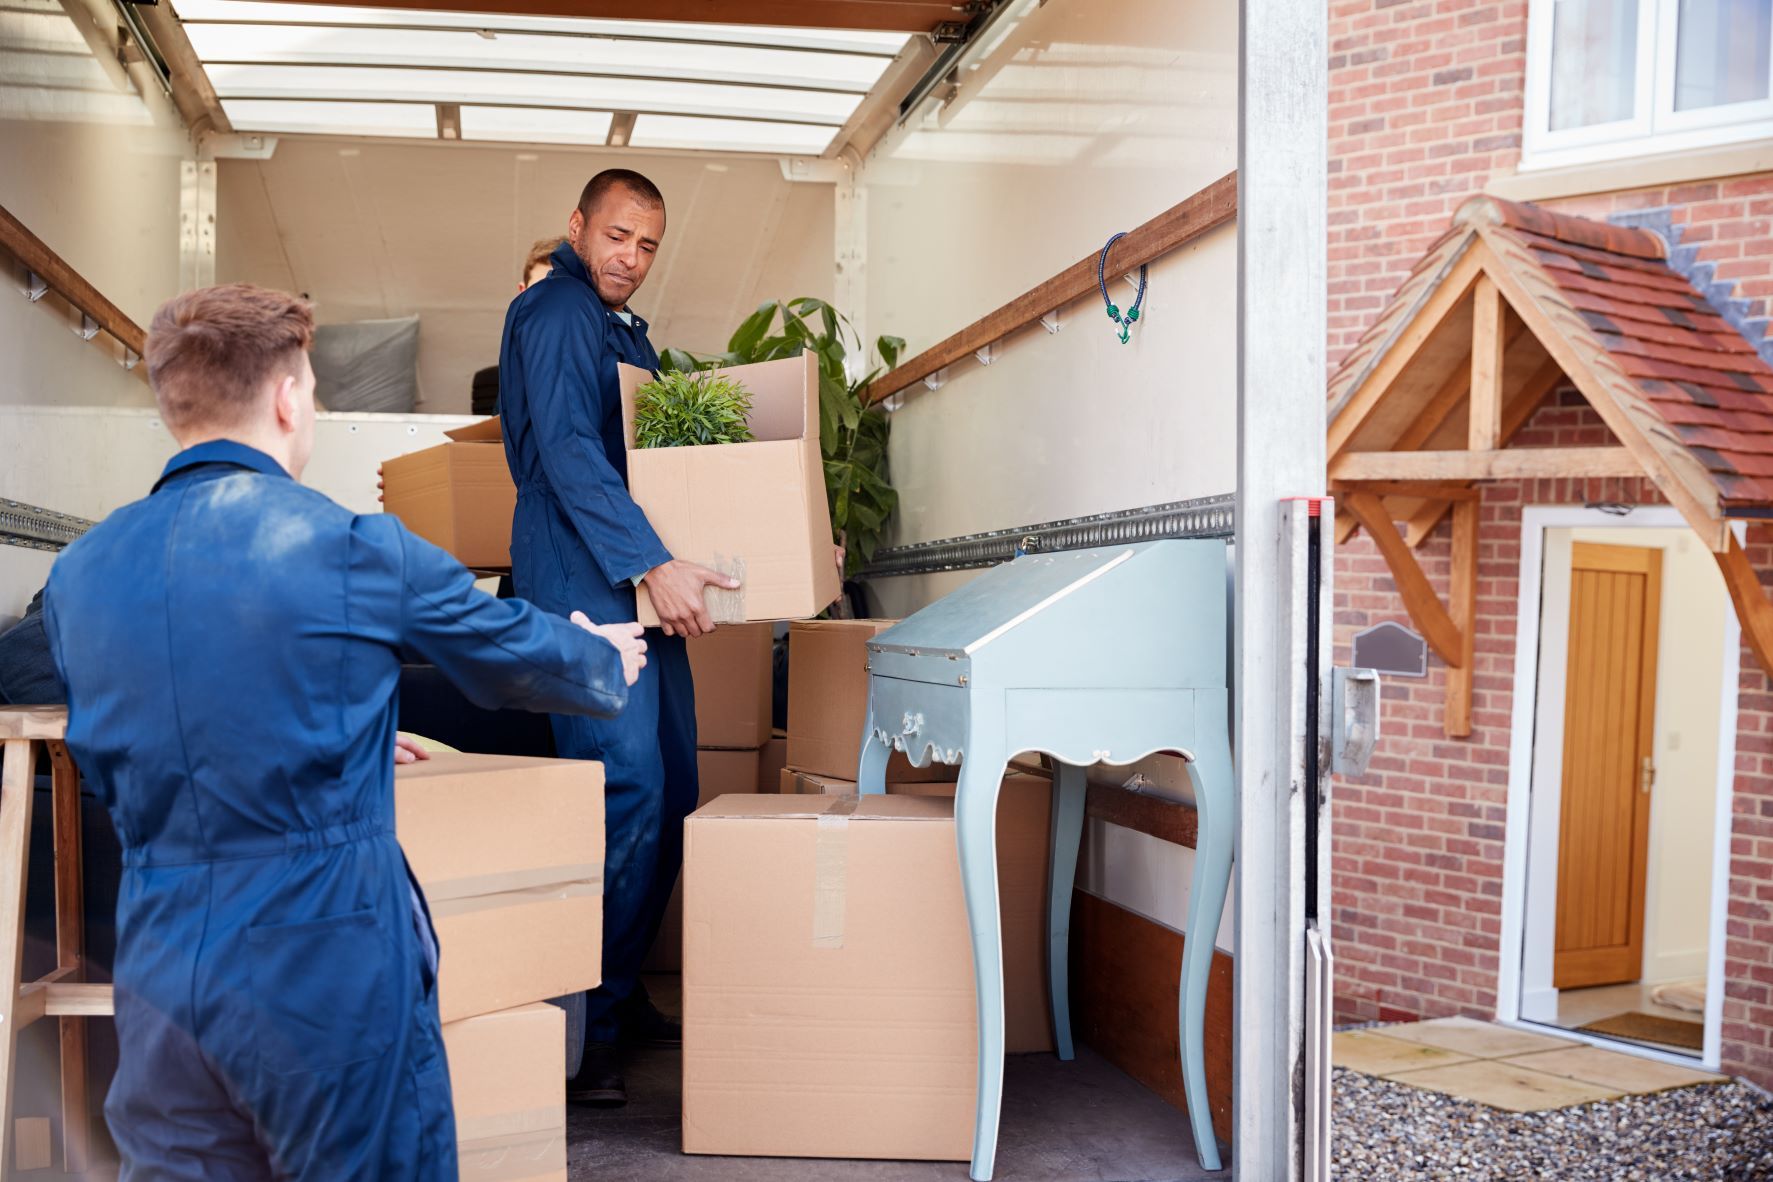 Is It Better To Hire A Mover Or Rent A Truck And Do It Yourself?